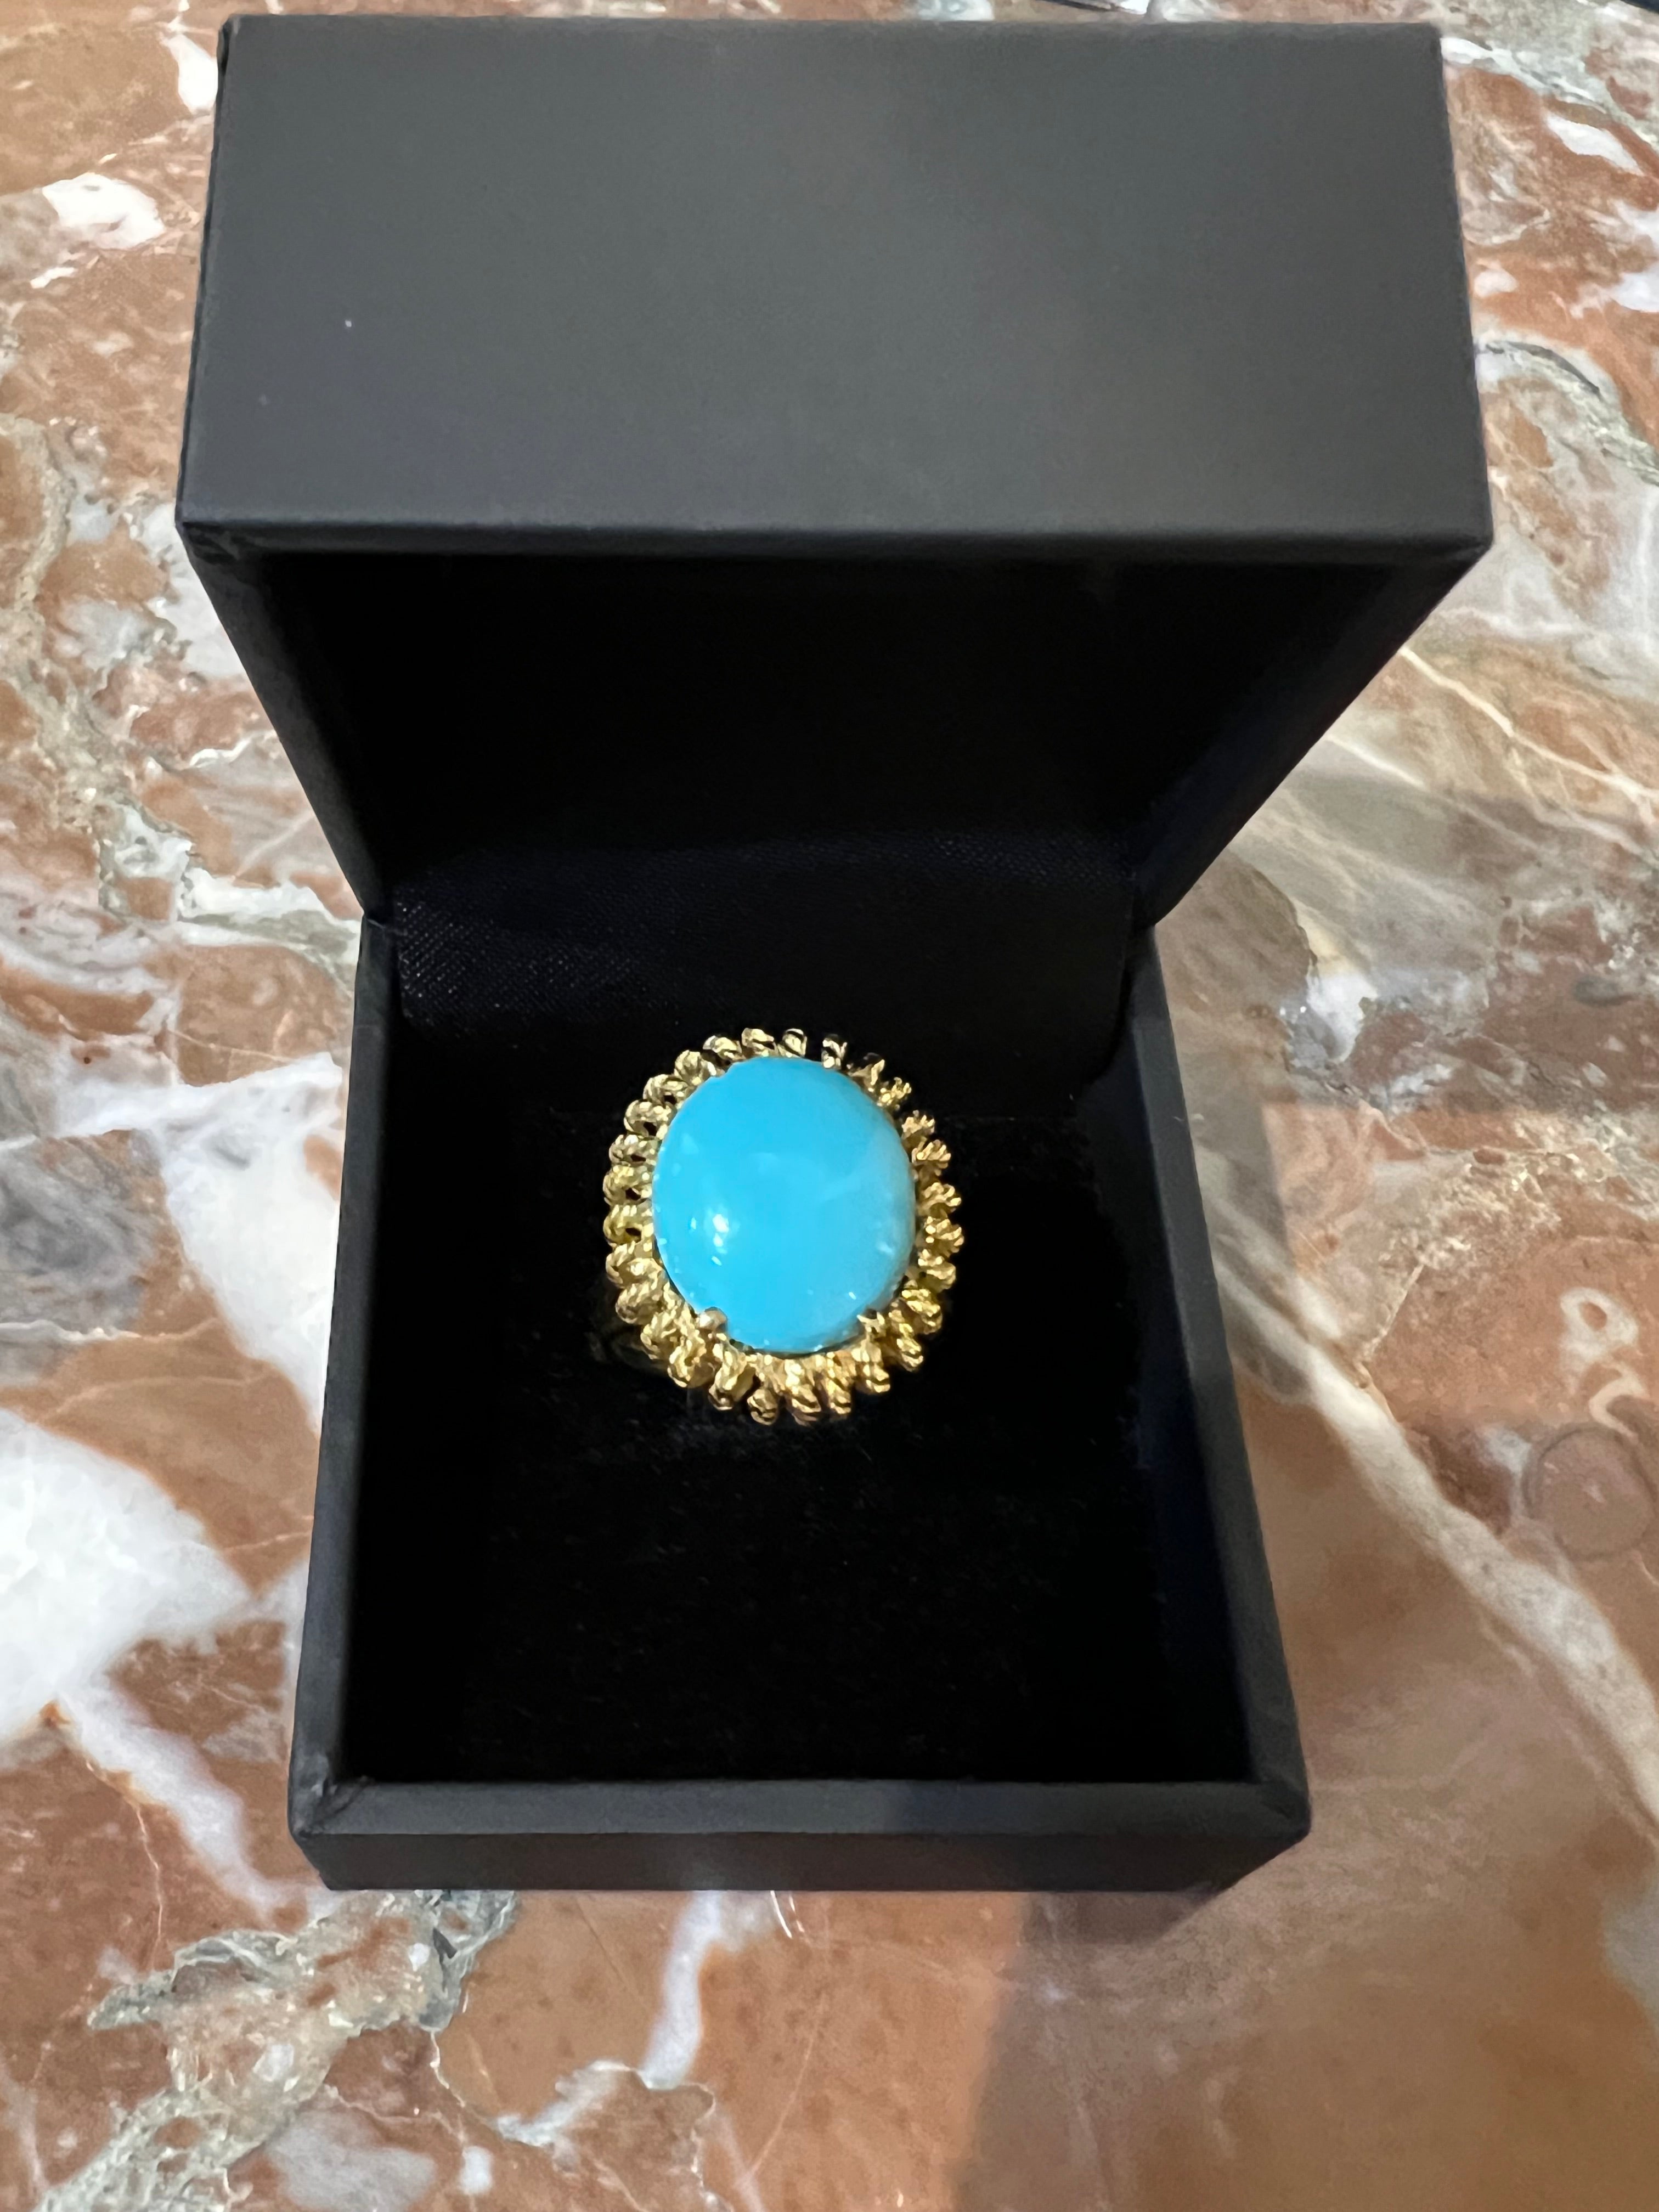 Vintage Sea Urchin Shaped Turquoise Cabochon 18 Carat Yellow Gold Ring